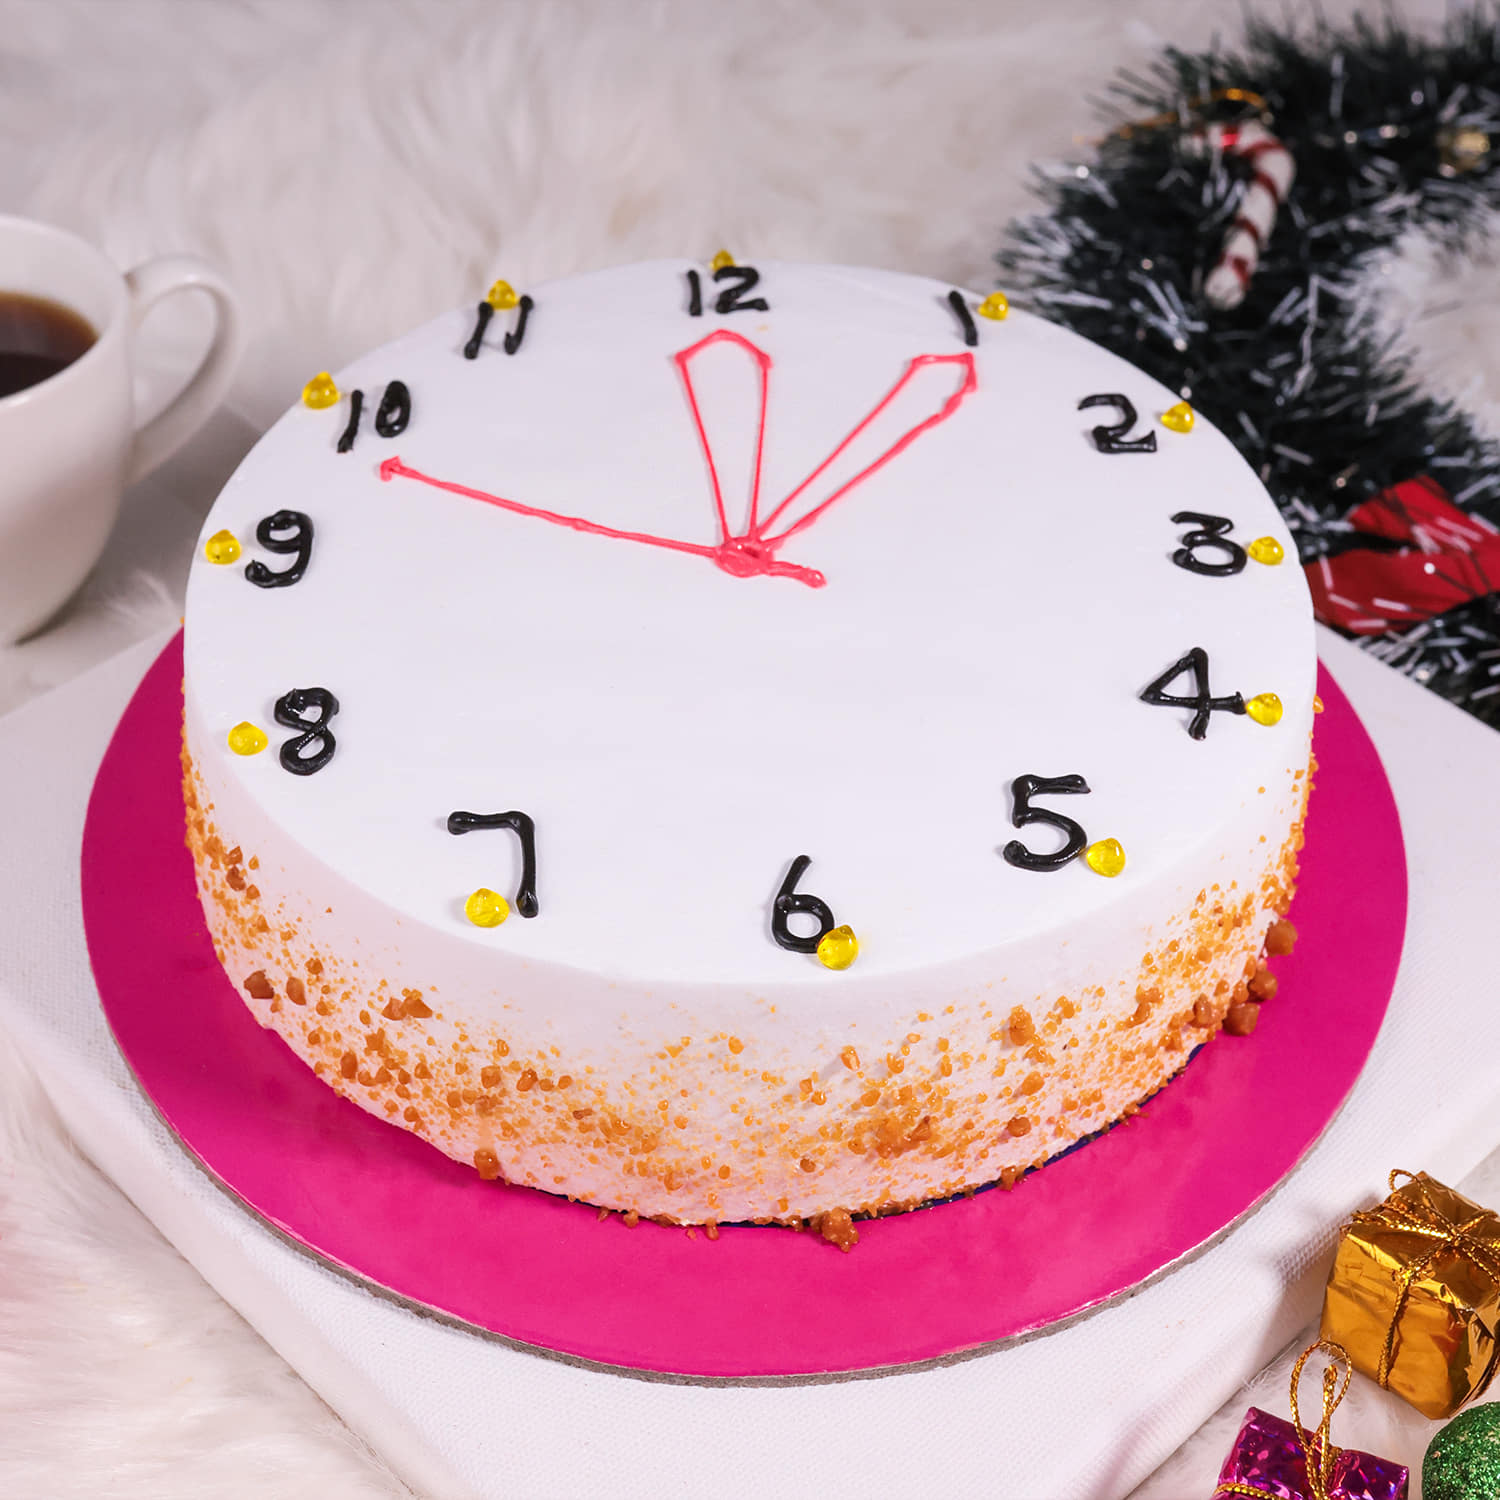 nye-decorations-4-clock-cake-toppers-2 - The Paper